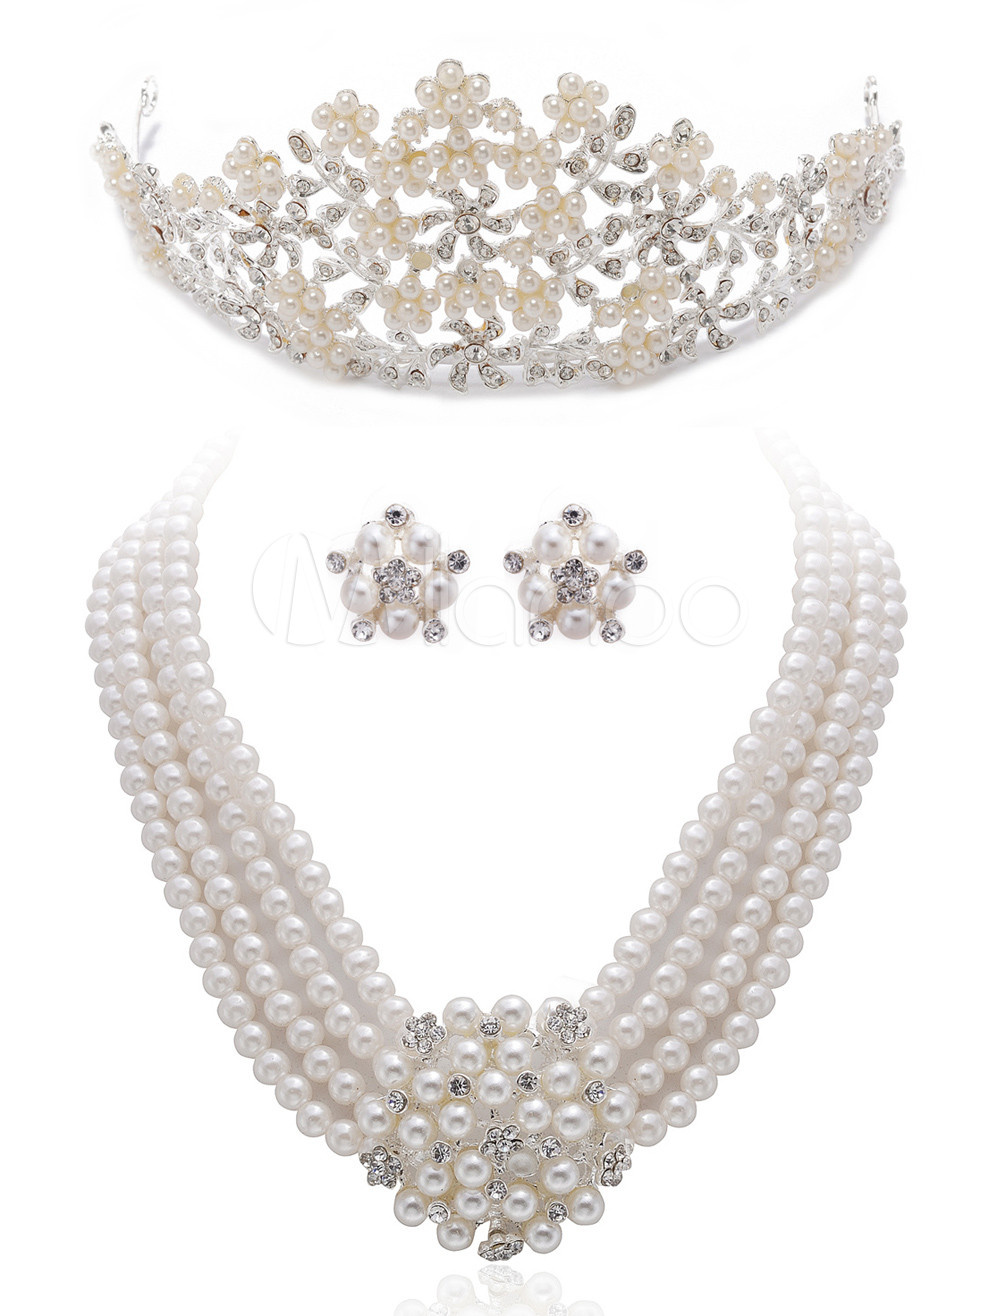 Faux Pearl Floral Metal Jewelry Set For Wedding - Milanoo.com